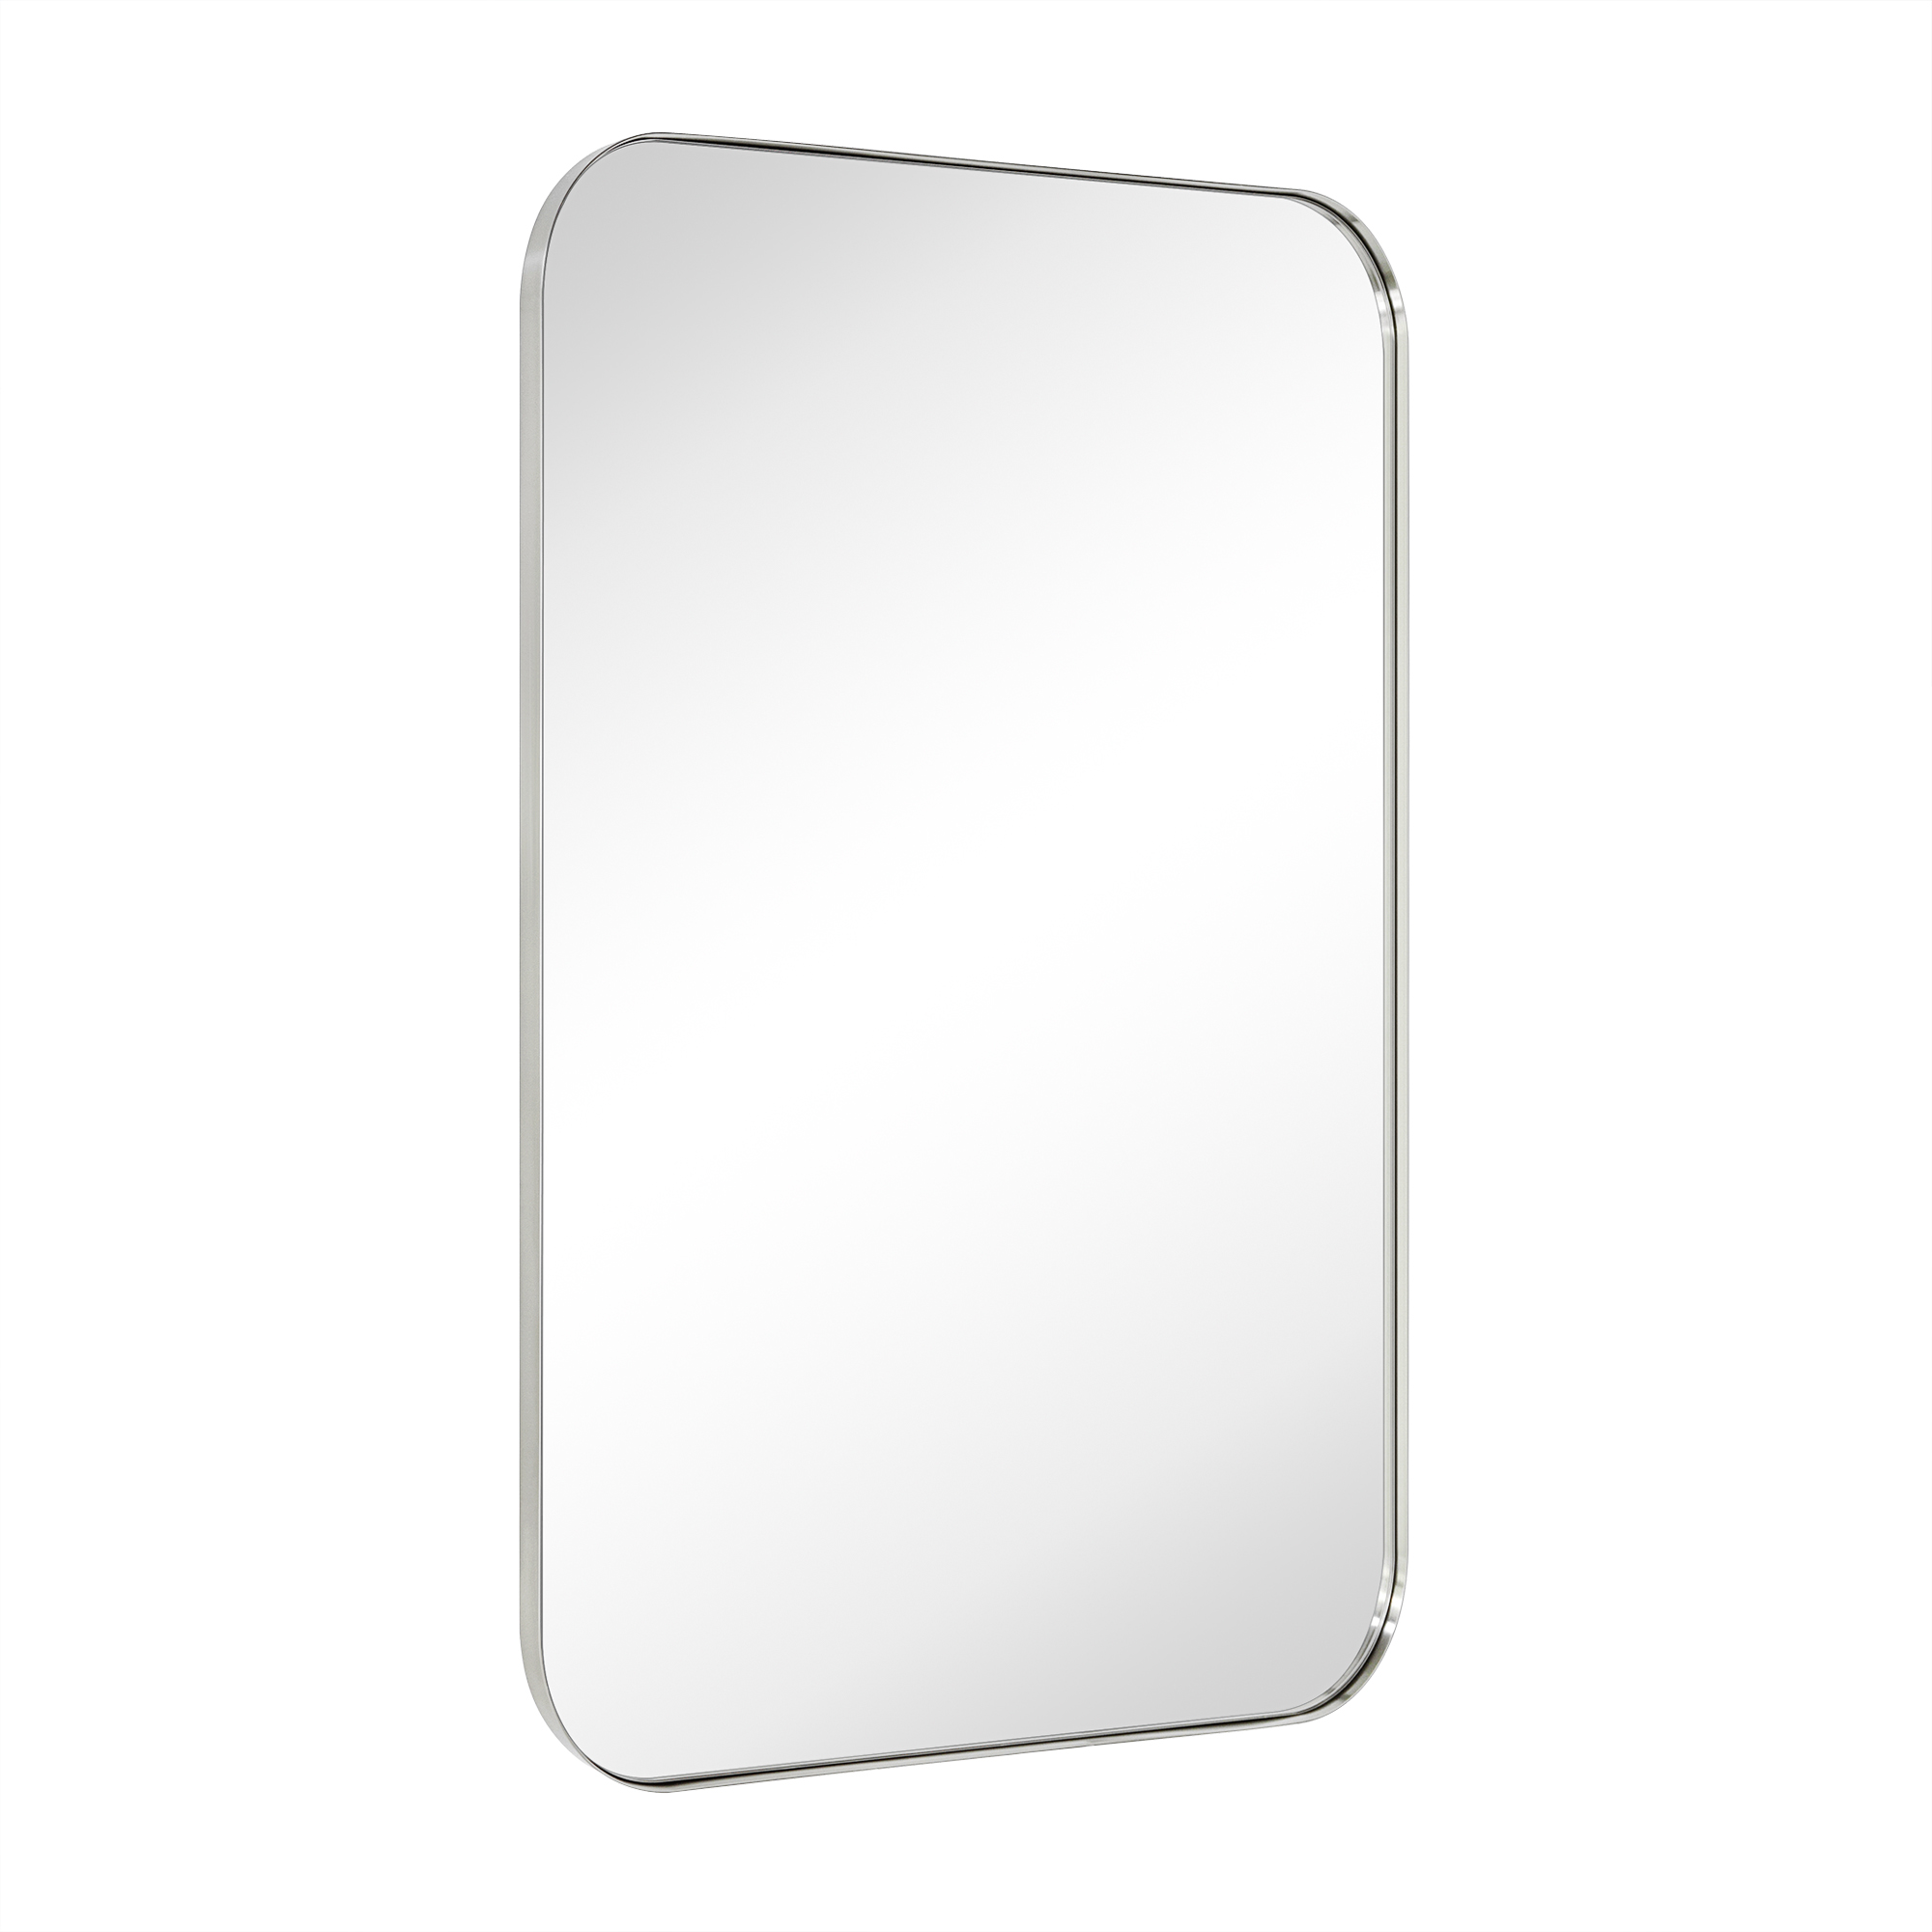 Mid-Century Modern Chic Metal Rounded Wall Mirrors-30x48-Brushed Nickel